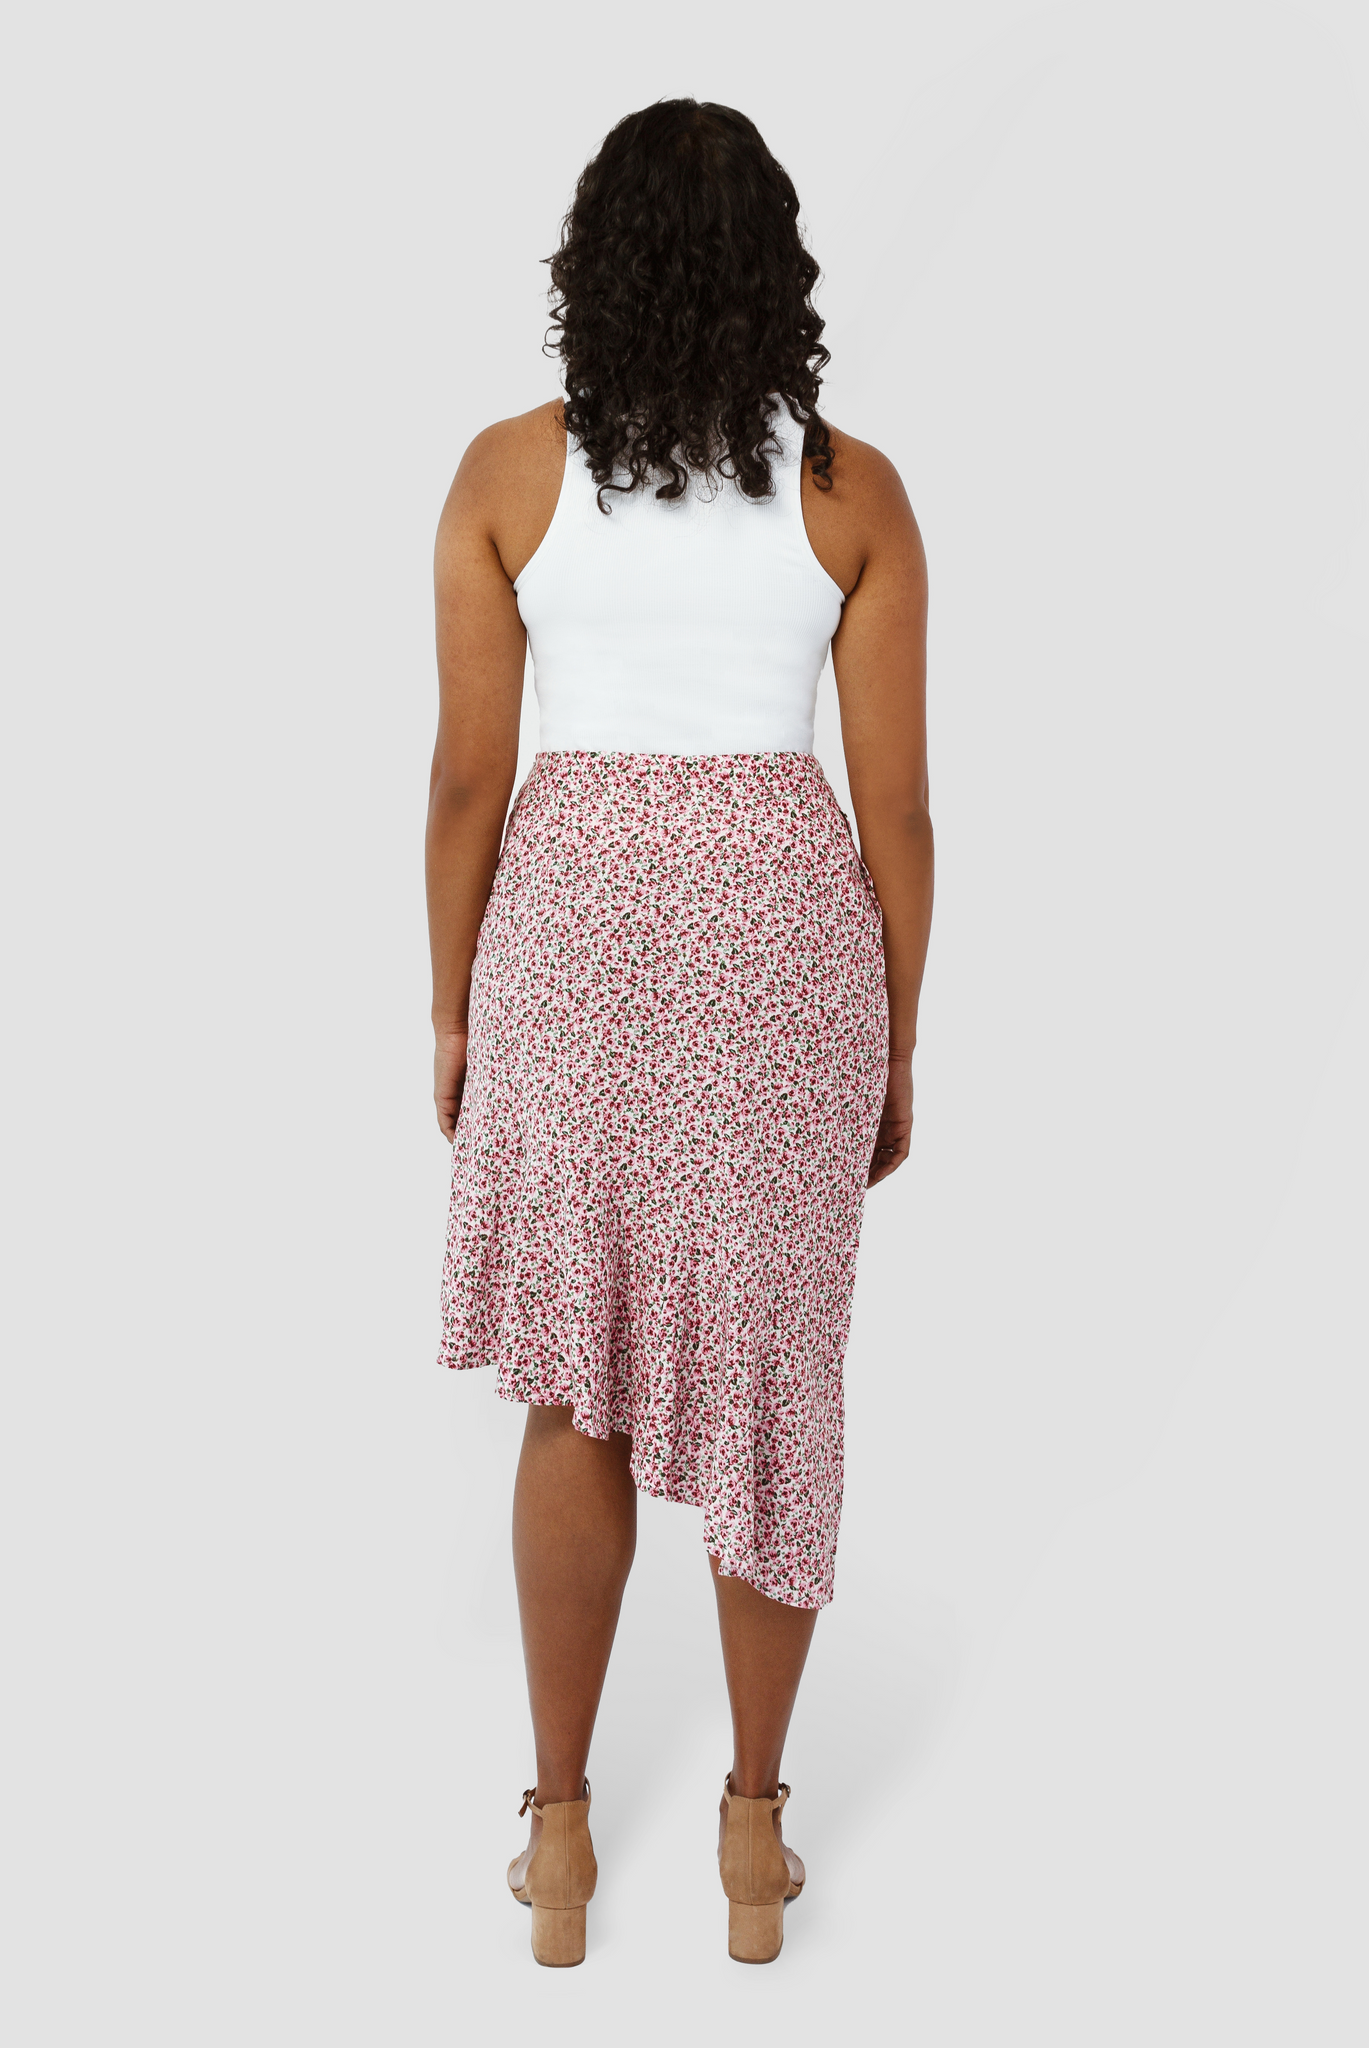 The Cascade Skirt by Aam is designed to sit snug at the waist with more room for full hips and thighs. In this image you can see the back view.